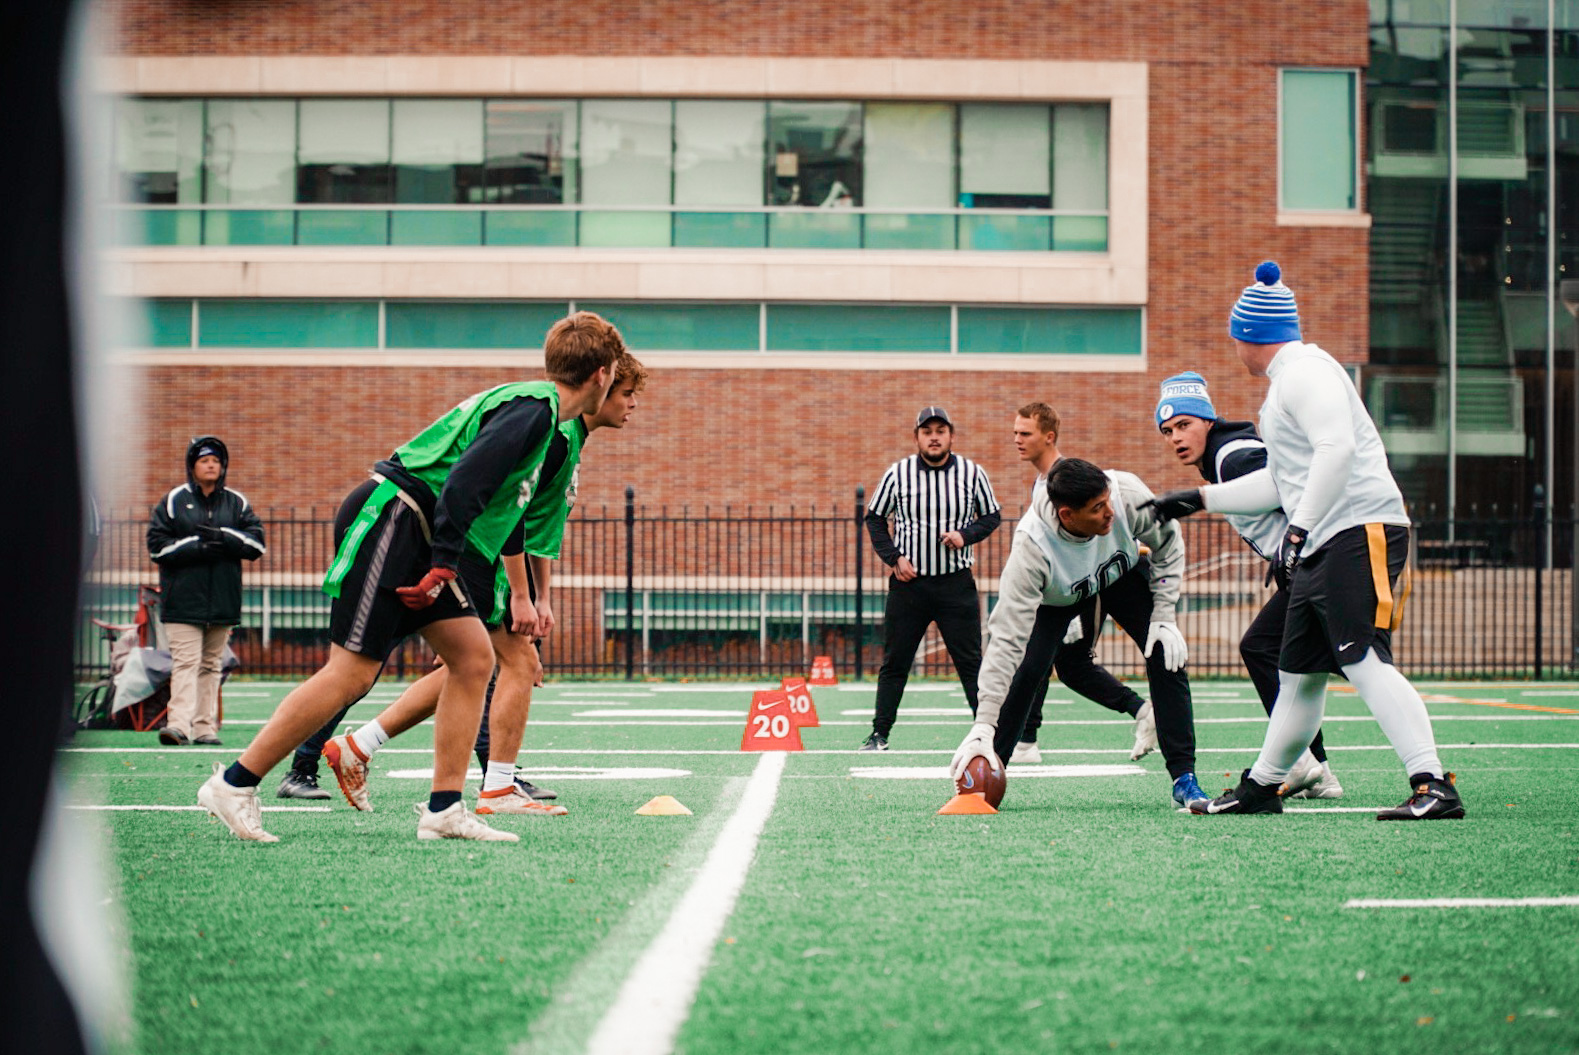 Looking down the line of scrimmage at a flag football game.